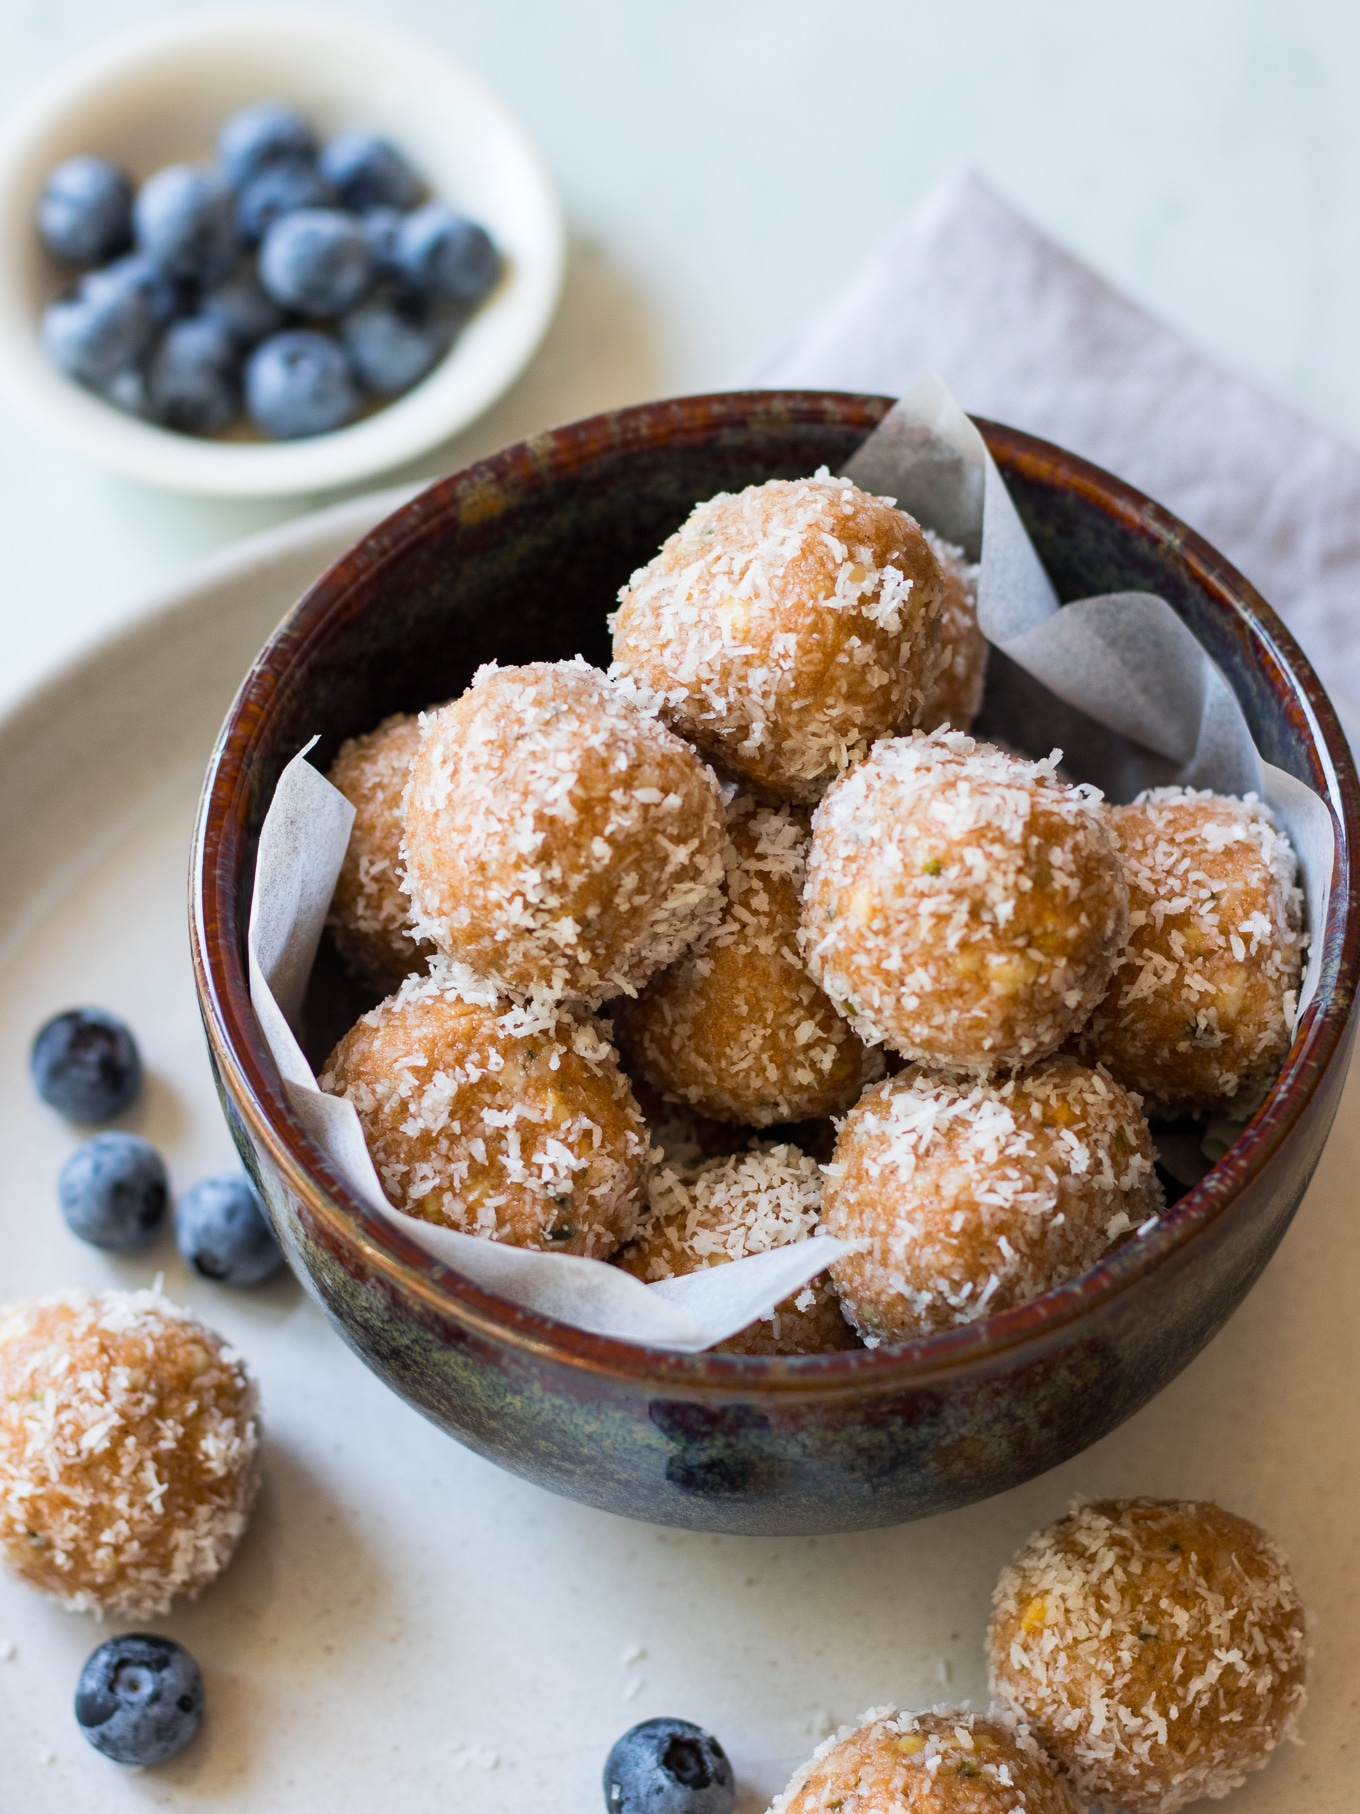 No Food Processor Paleo Protein Balls! One bowl to make these quick mix energy balls. The perfect healthy snack made with nut butter, honey, hemp seeds and coconut. Yum! #proteinballs #energyballs #paleo #glutenfree